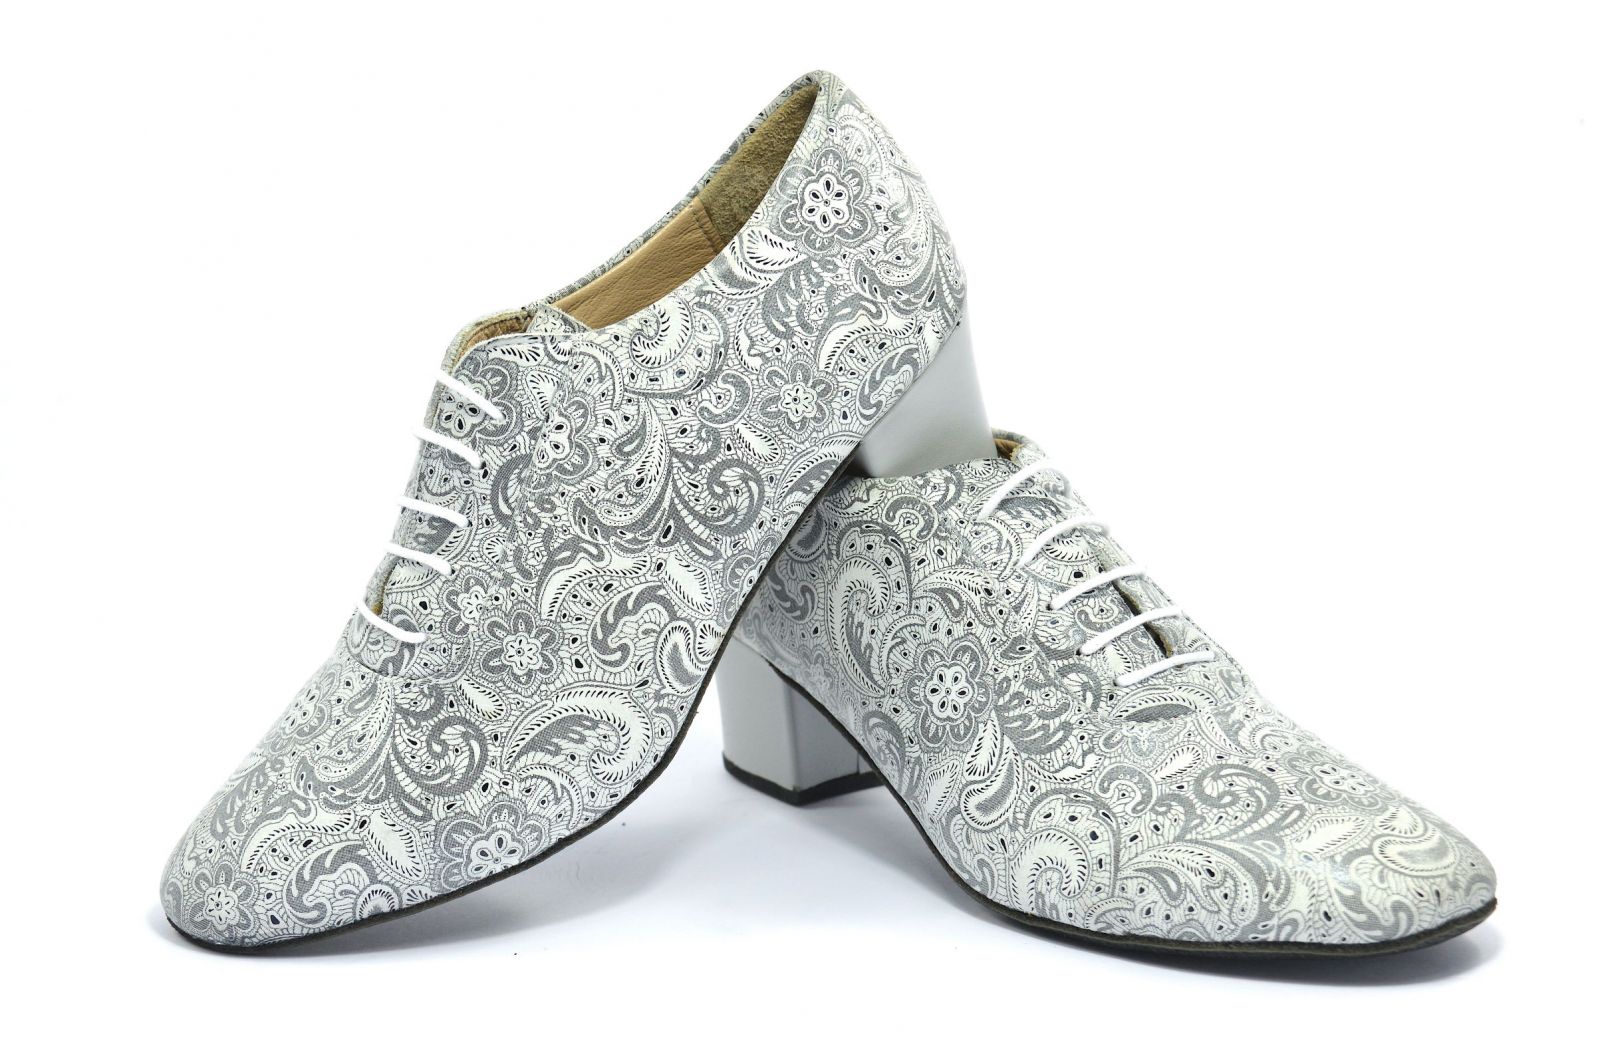 Women's Argentine Tango Shoe, oxford style, by soft grey leather and grey prints.